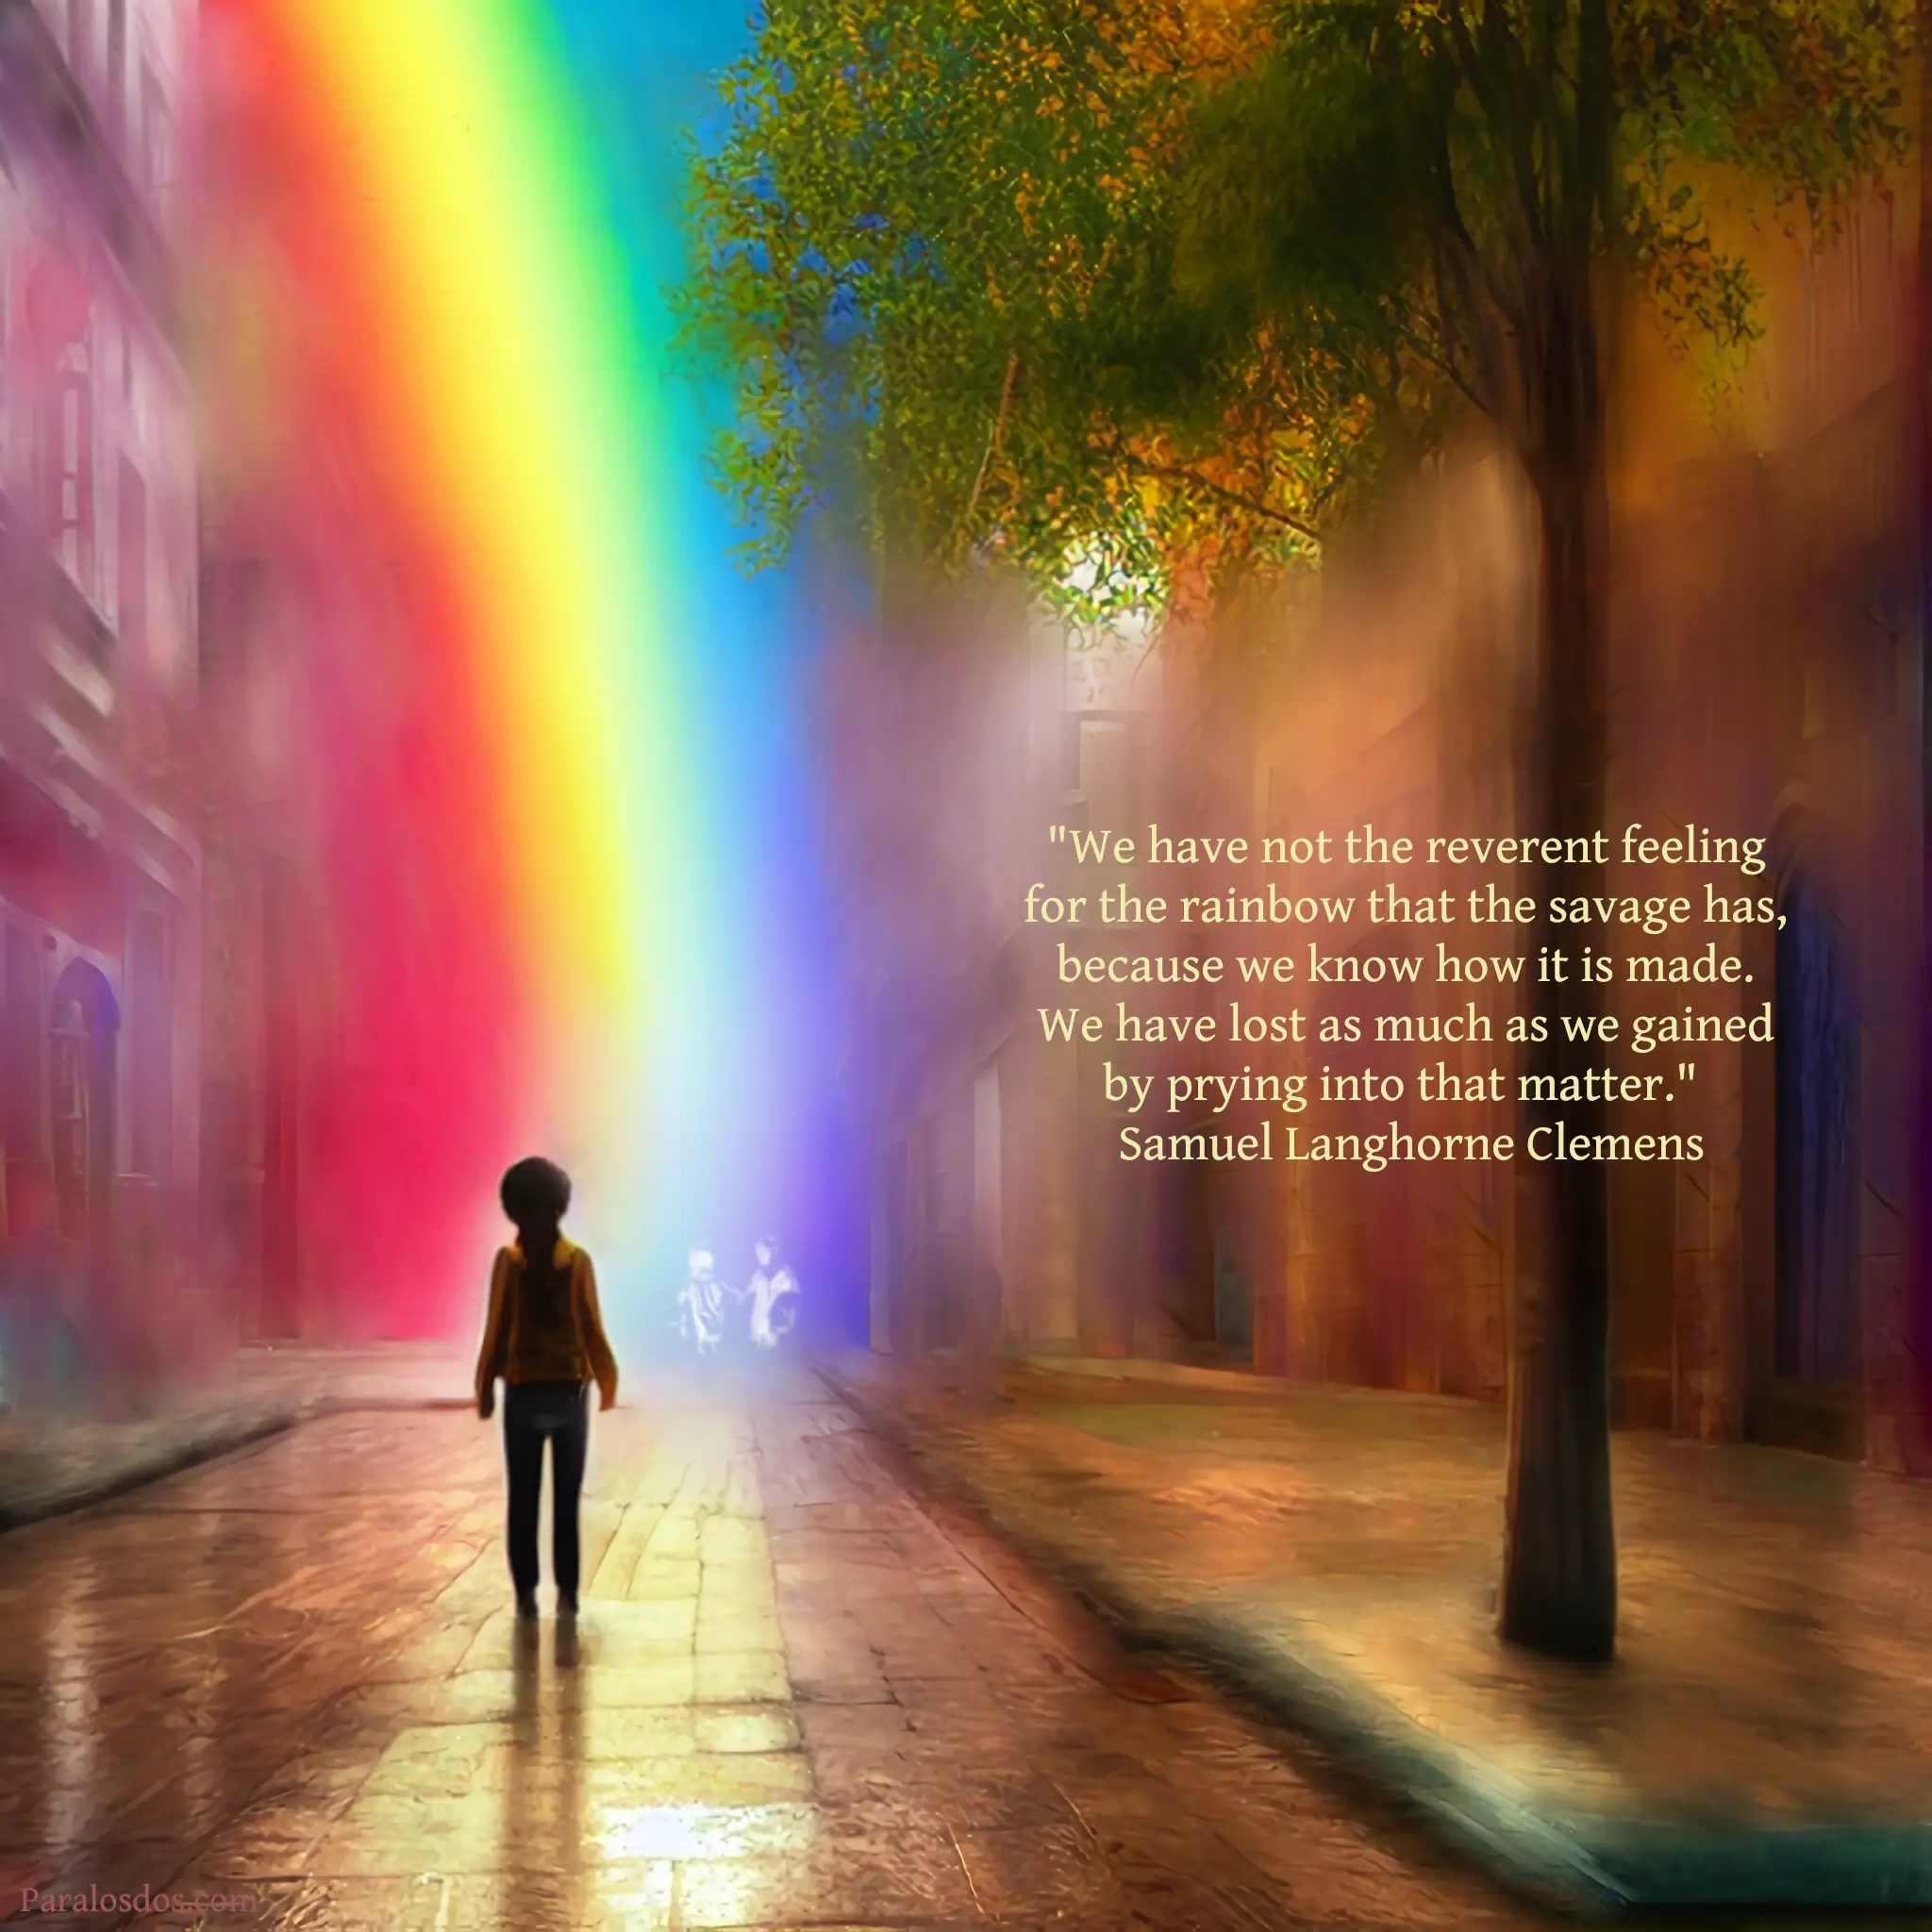 An artistic rendering of a figure on a narrow city street walking towards one end of a huge rainbow. The quote reads: "We have not the reverent feeling for the rainbow that the savage has, because we know how it is made. We have lost as much as we gained by prying into that matter." Samuel Langhorne Clemens